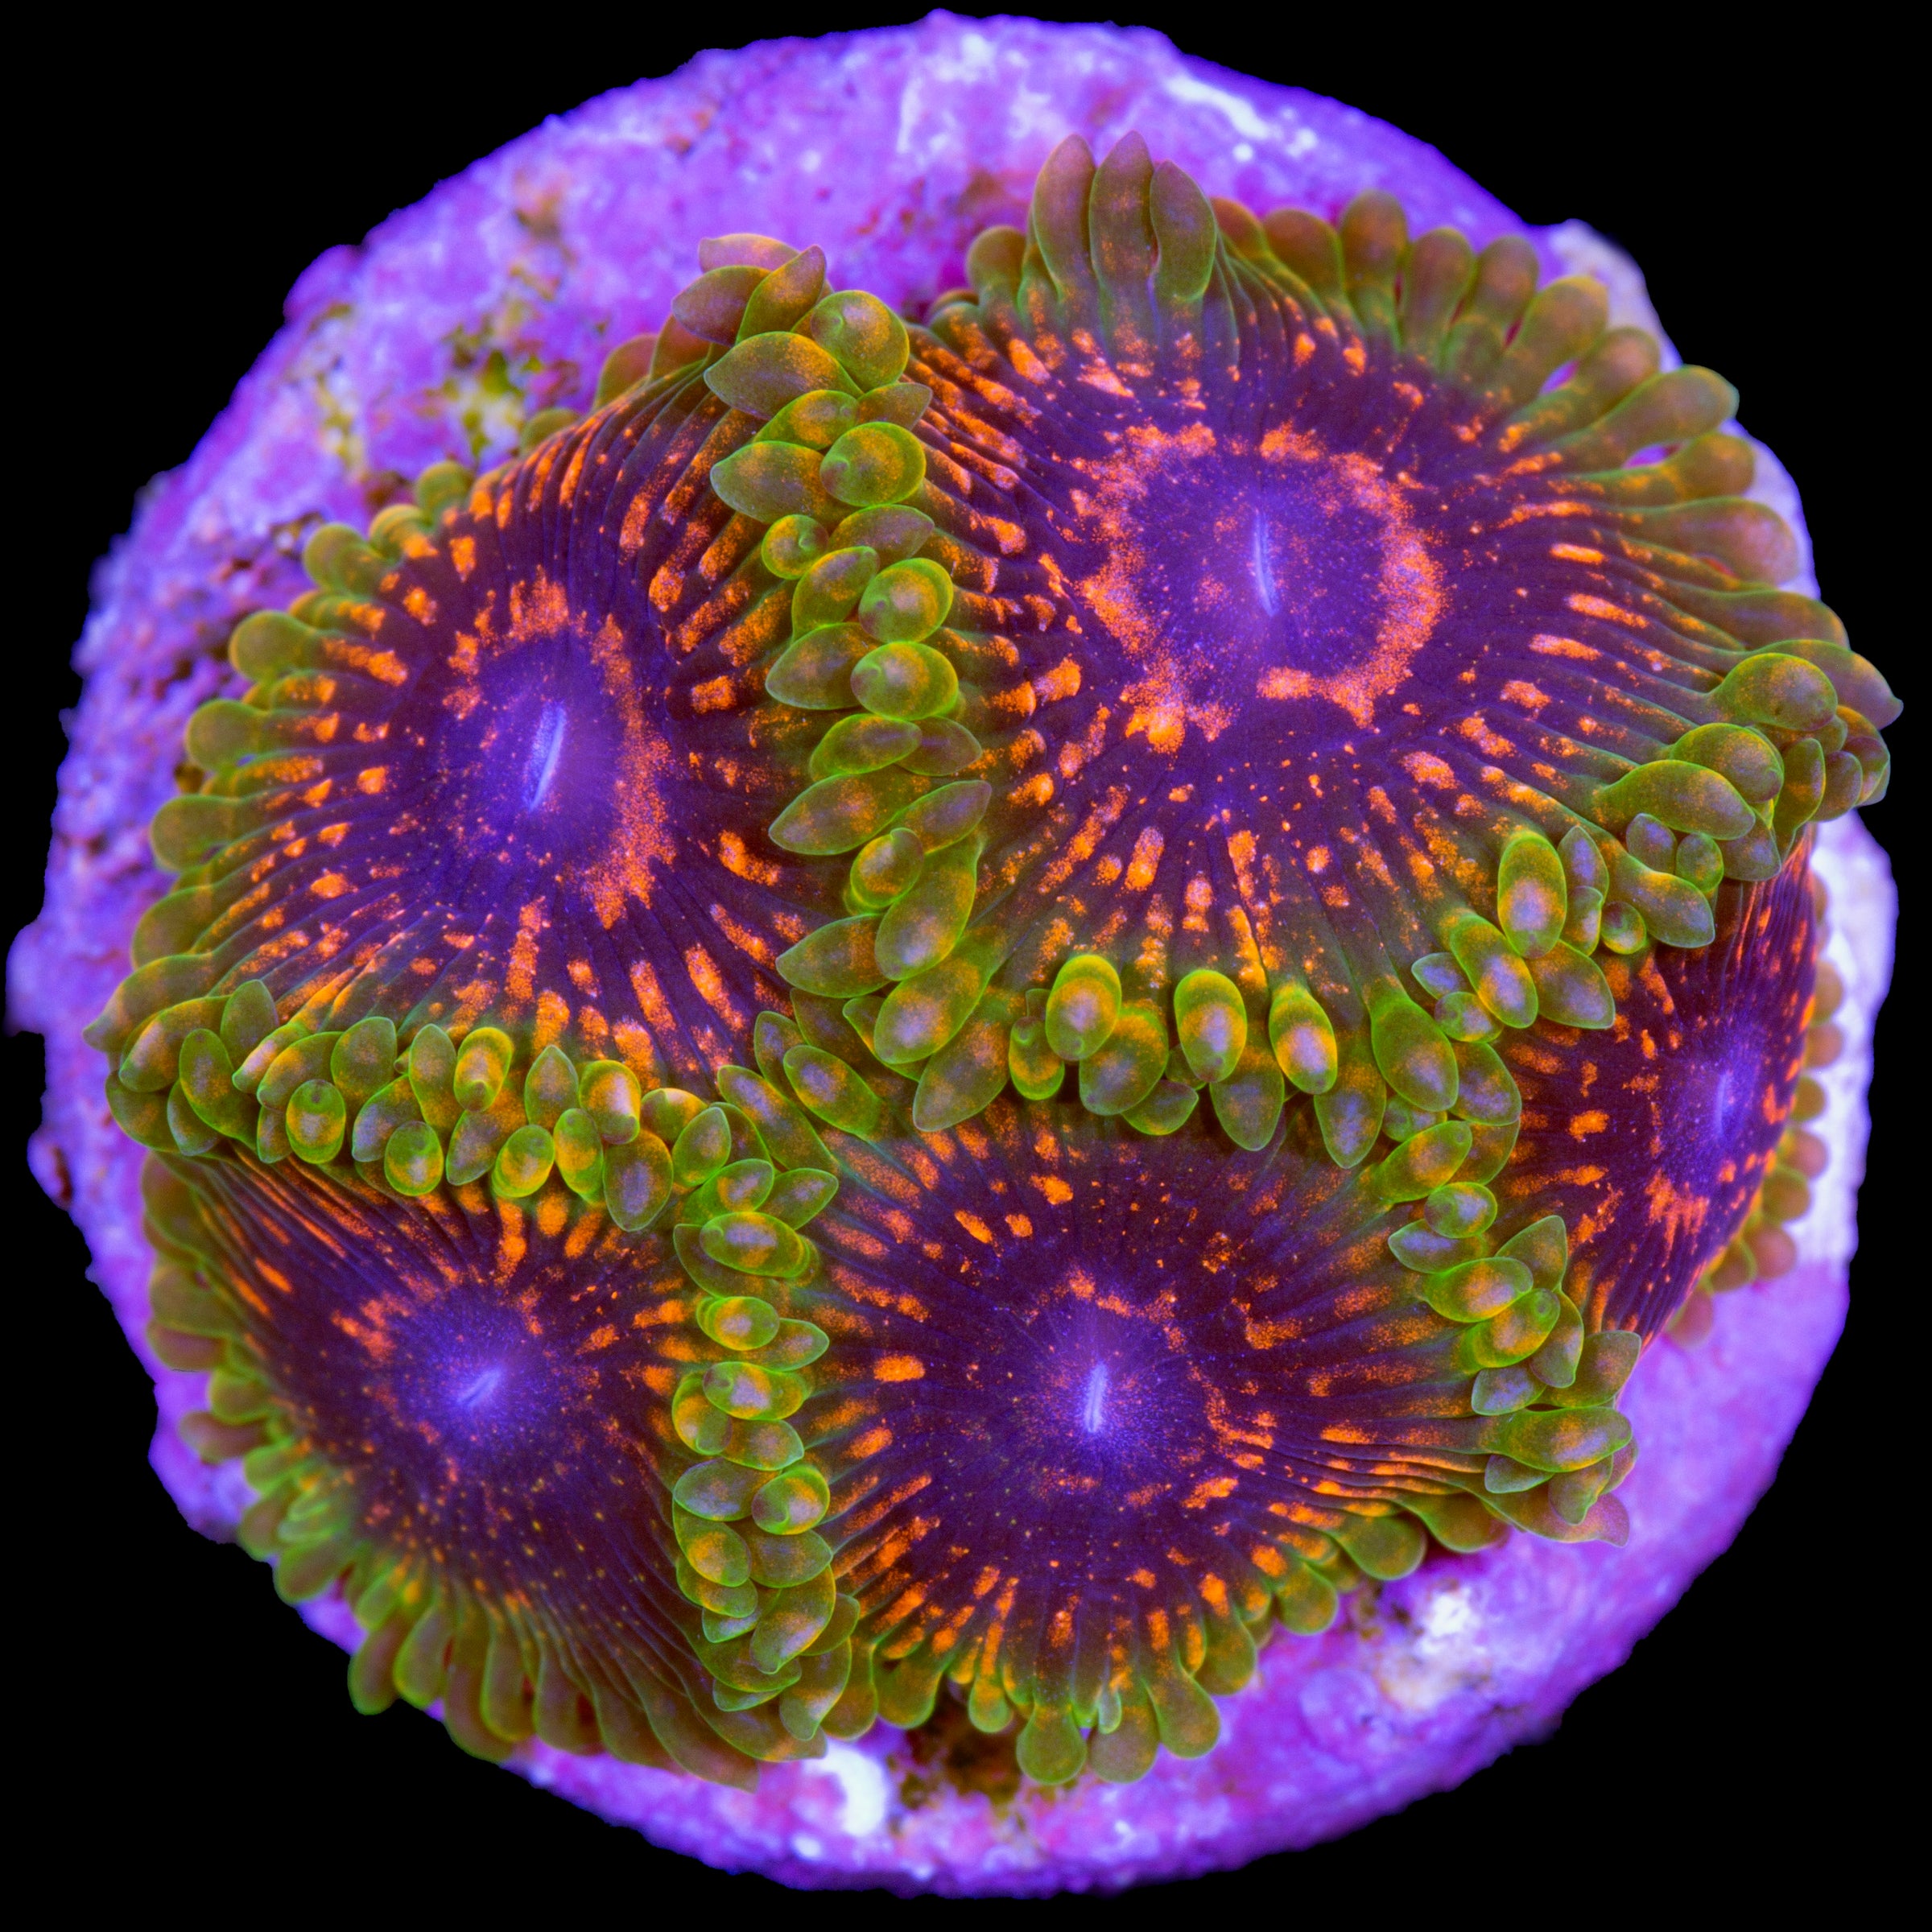 Beginner Corals for Sale | Buy Beginner Corals | Live Coral | Rare ...